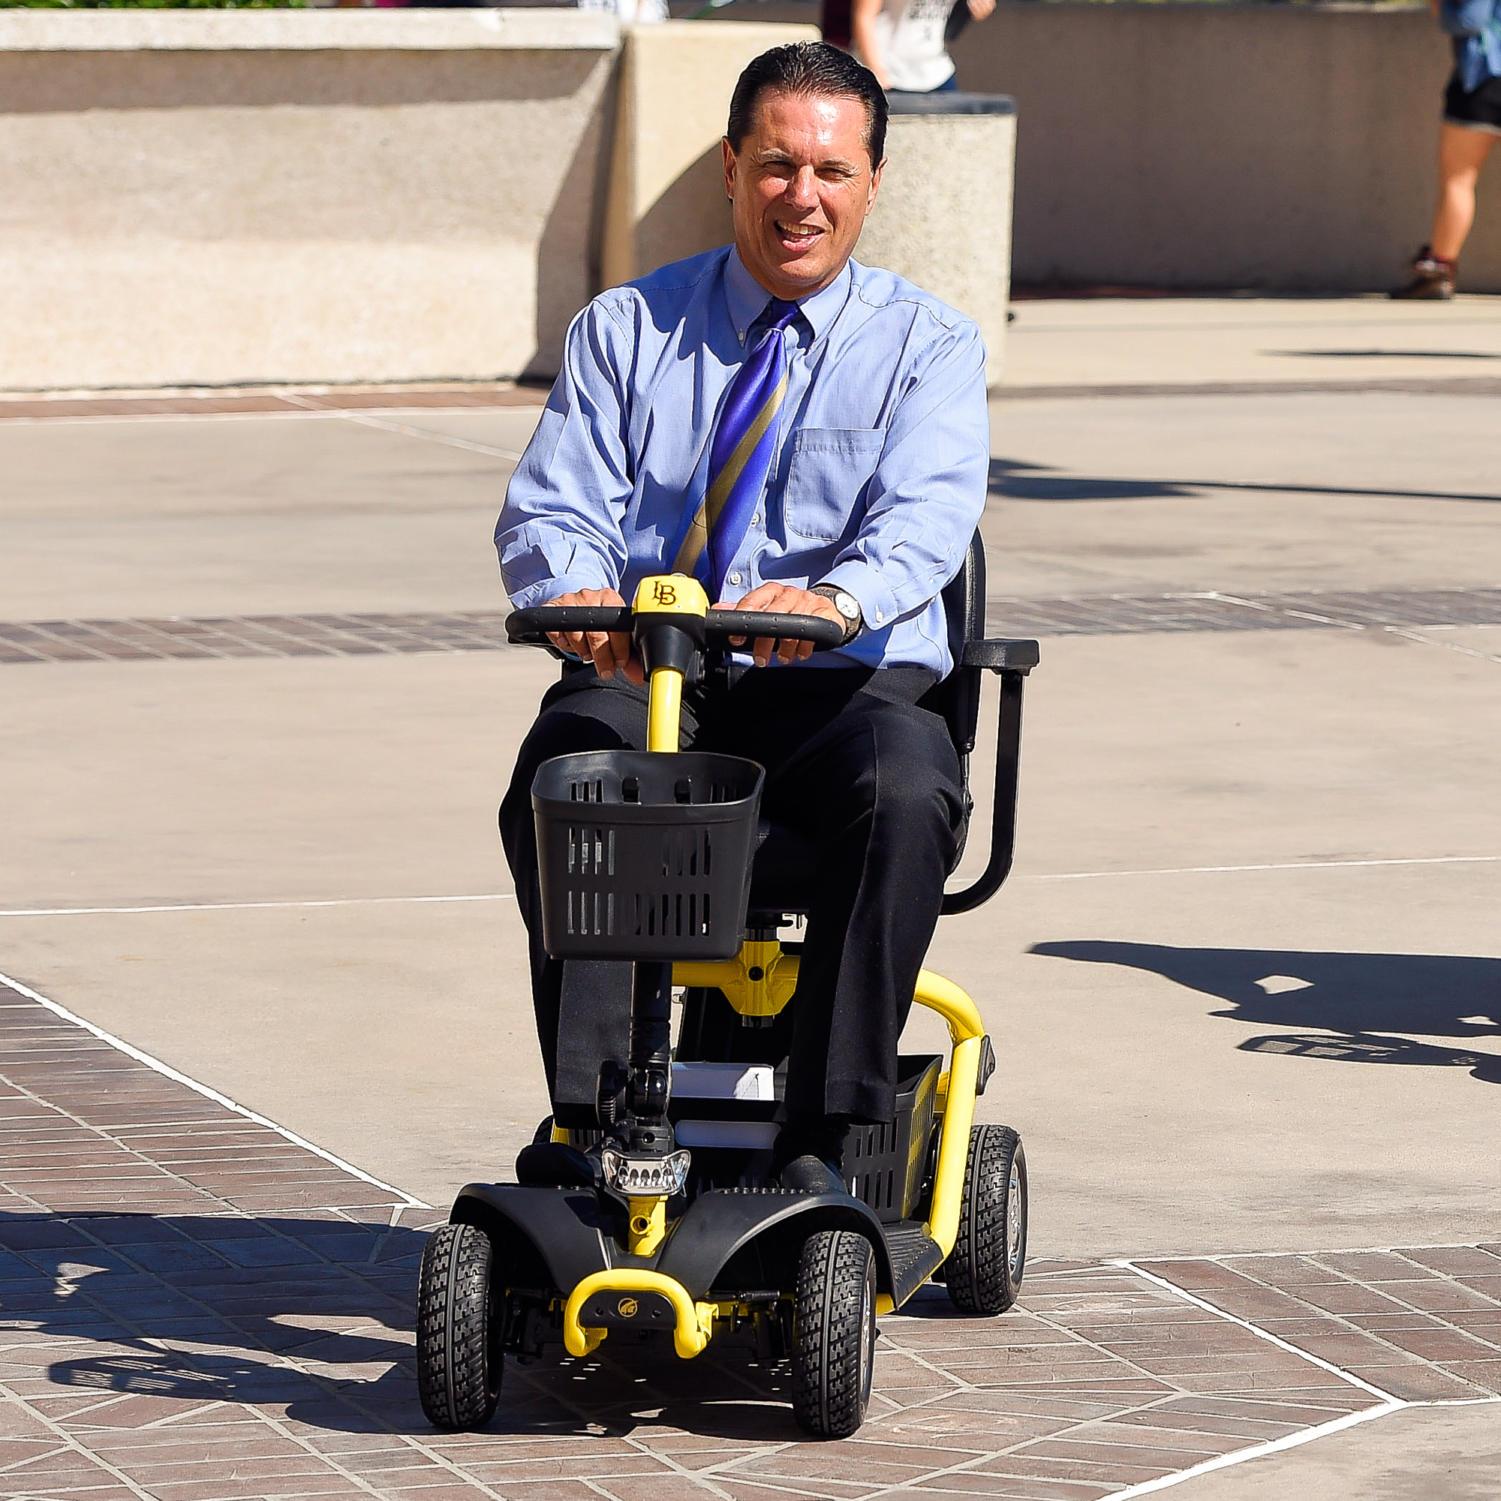 Disabled Student Services Director David Sanfilippo, take's CSULB’s new mobility scooters for a test ride after presenting them to the school in Long Beach, CA on Wednesday, Oct. 21, 2015. CSULB acquired six mobility scooters to check out to students who have temporary disabilities due to injuries, illness or surgery. Two scooters will be used by health services and four will be used by Disabled Student Services.